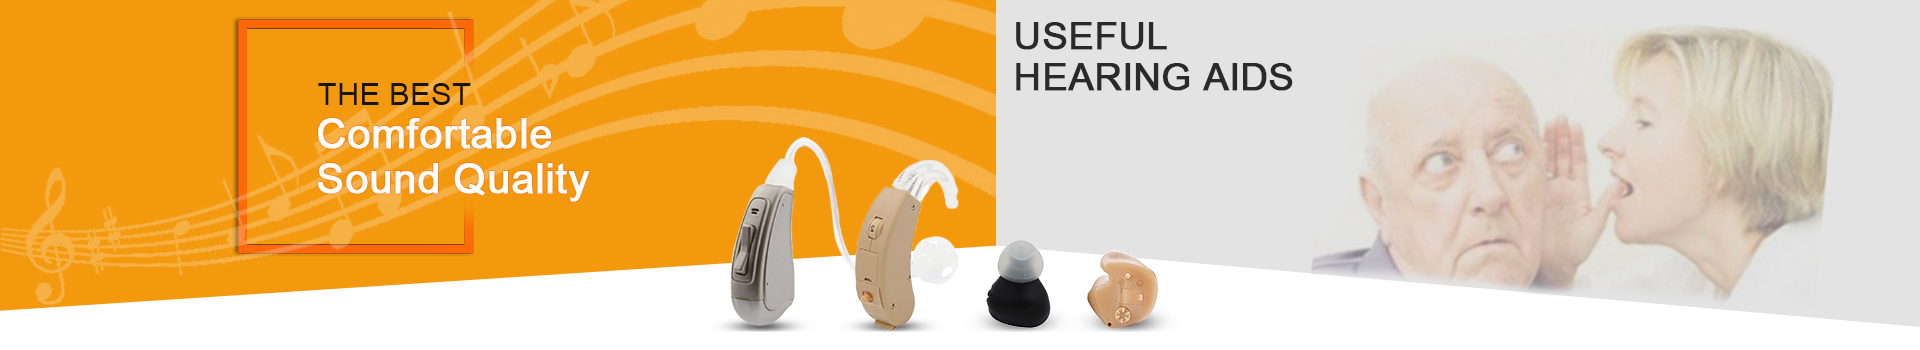 Hearing aids products